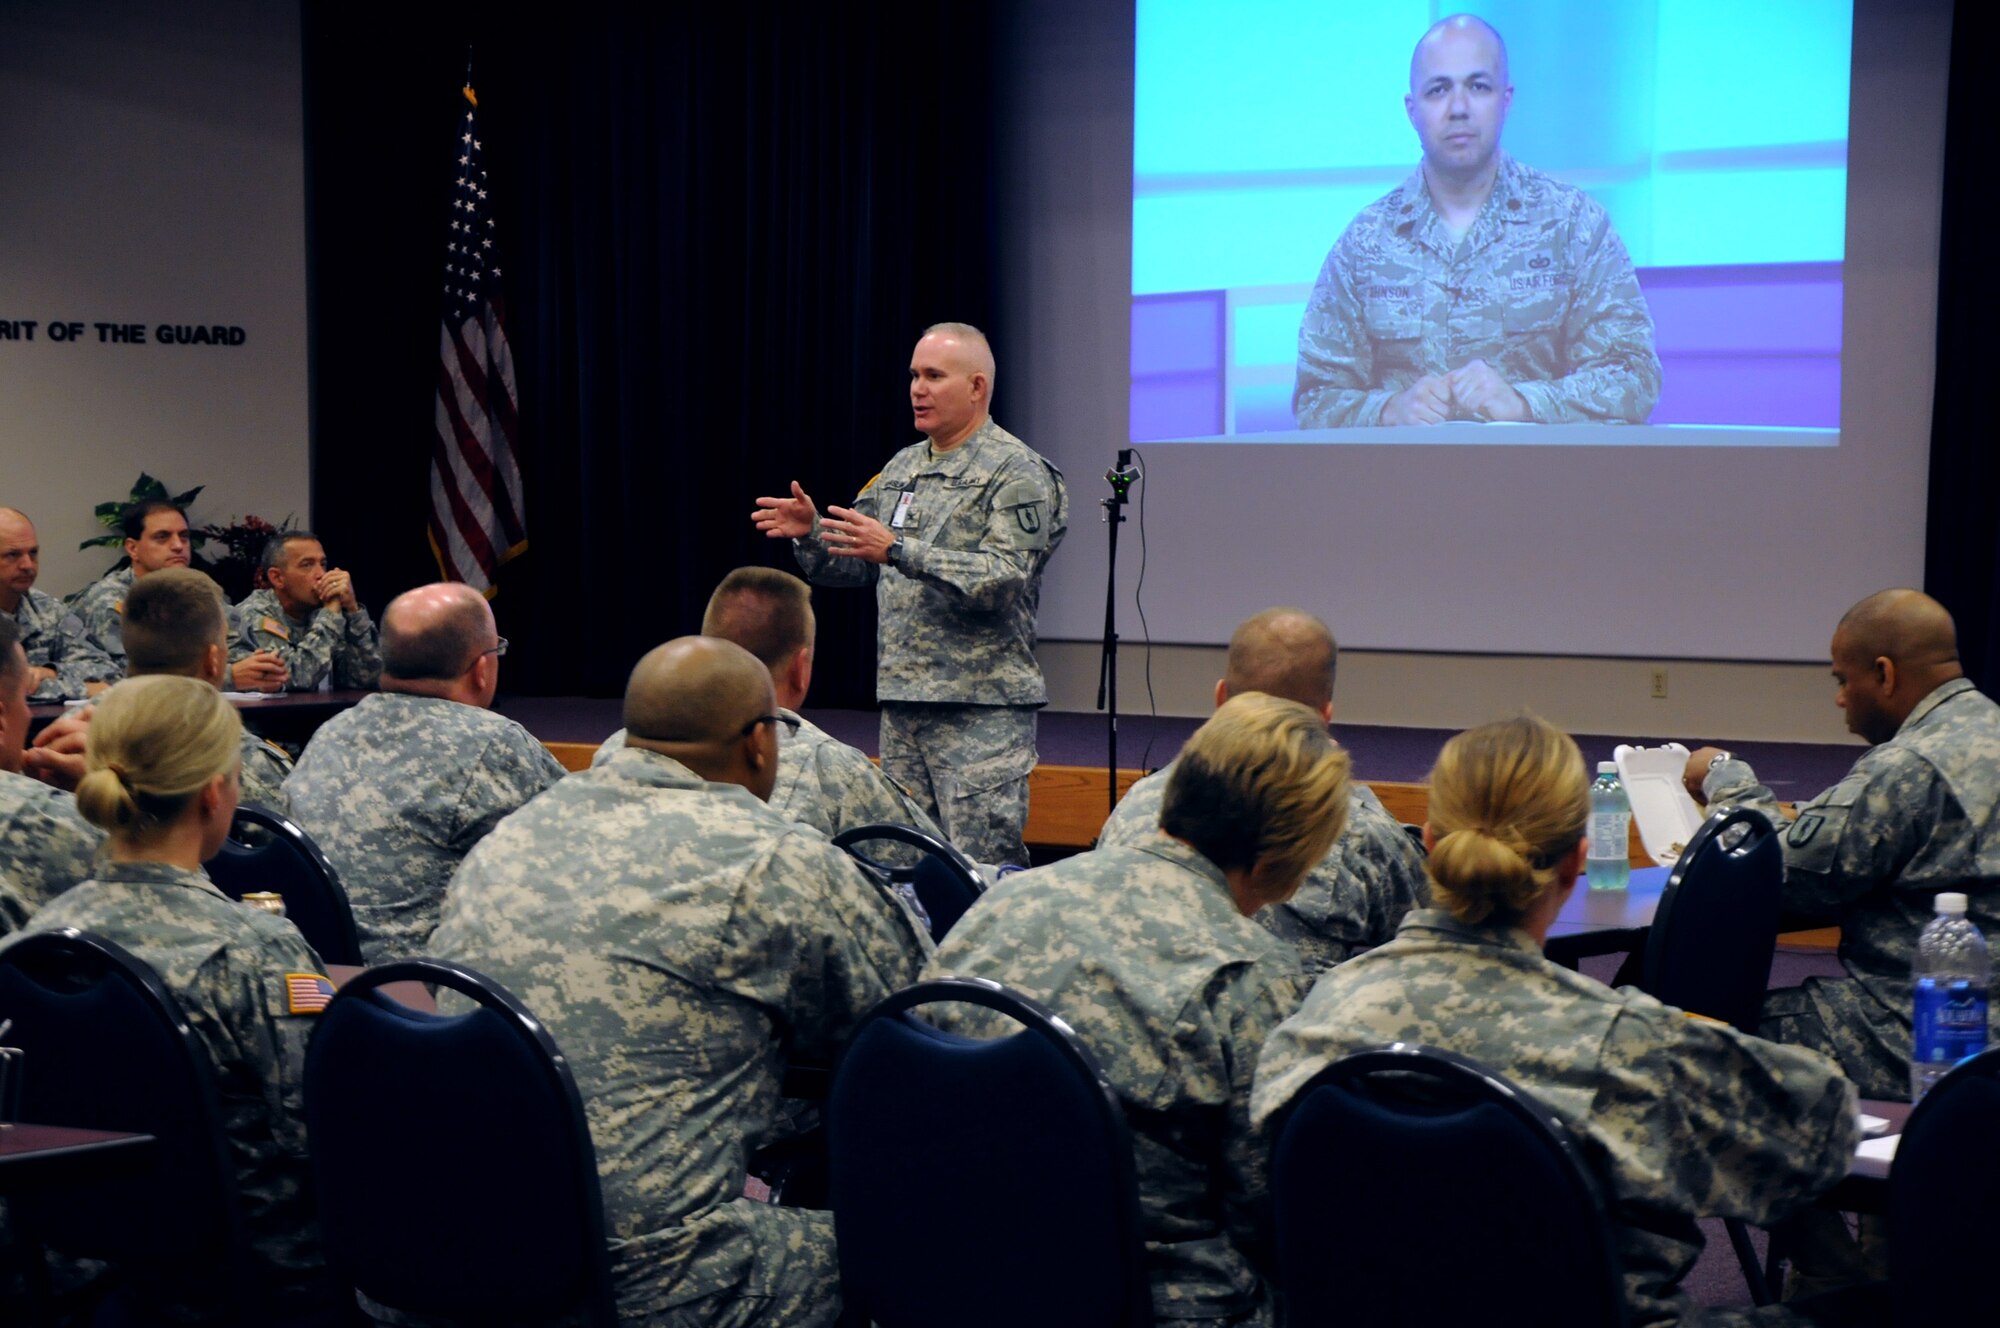 LITTLE ROCK, Ark. - Army COL Timothy Keasling, commandant of the National Guard's LaVern E. Weber Professional Education Center, gives an overview here, Sept. 16, 2013, to about 50 Army National Guard Soldiers during a live HD broadcast of U.S. Air Force Maj. Gabe Johnson, deputy commander of the I.G. Brown Training and Education Center (on screen). Johnson taught a professional development seminar about Personal Accountability from the I.G. Brown Training and Education Center in Tennessee. (U.S. Army National Guard courtesy photo/Released)